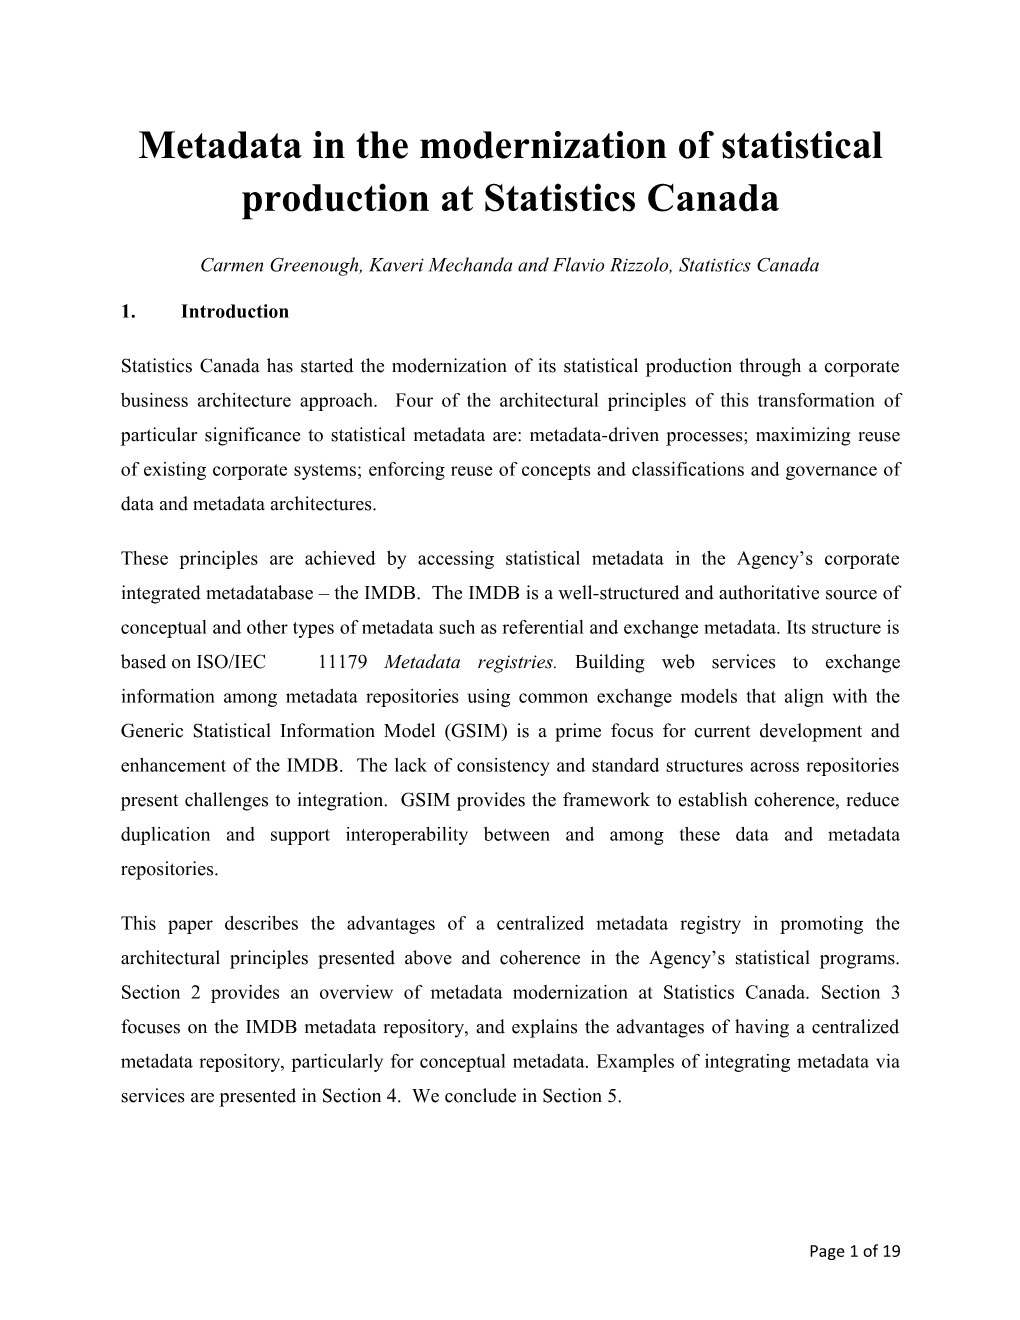 Metadata in the Modernization of Statistical Production at Statistics Canada